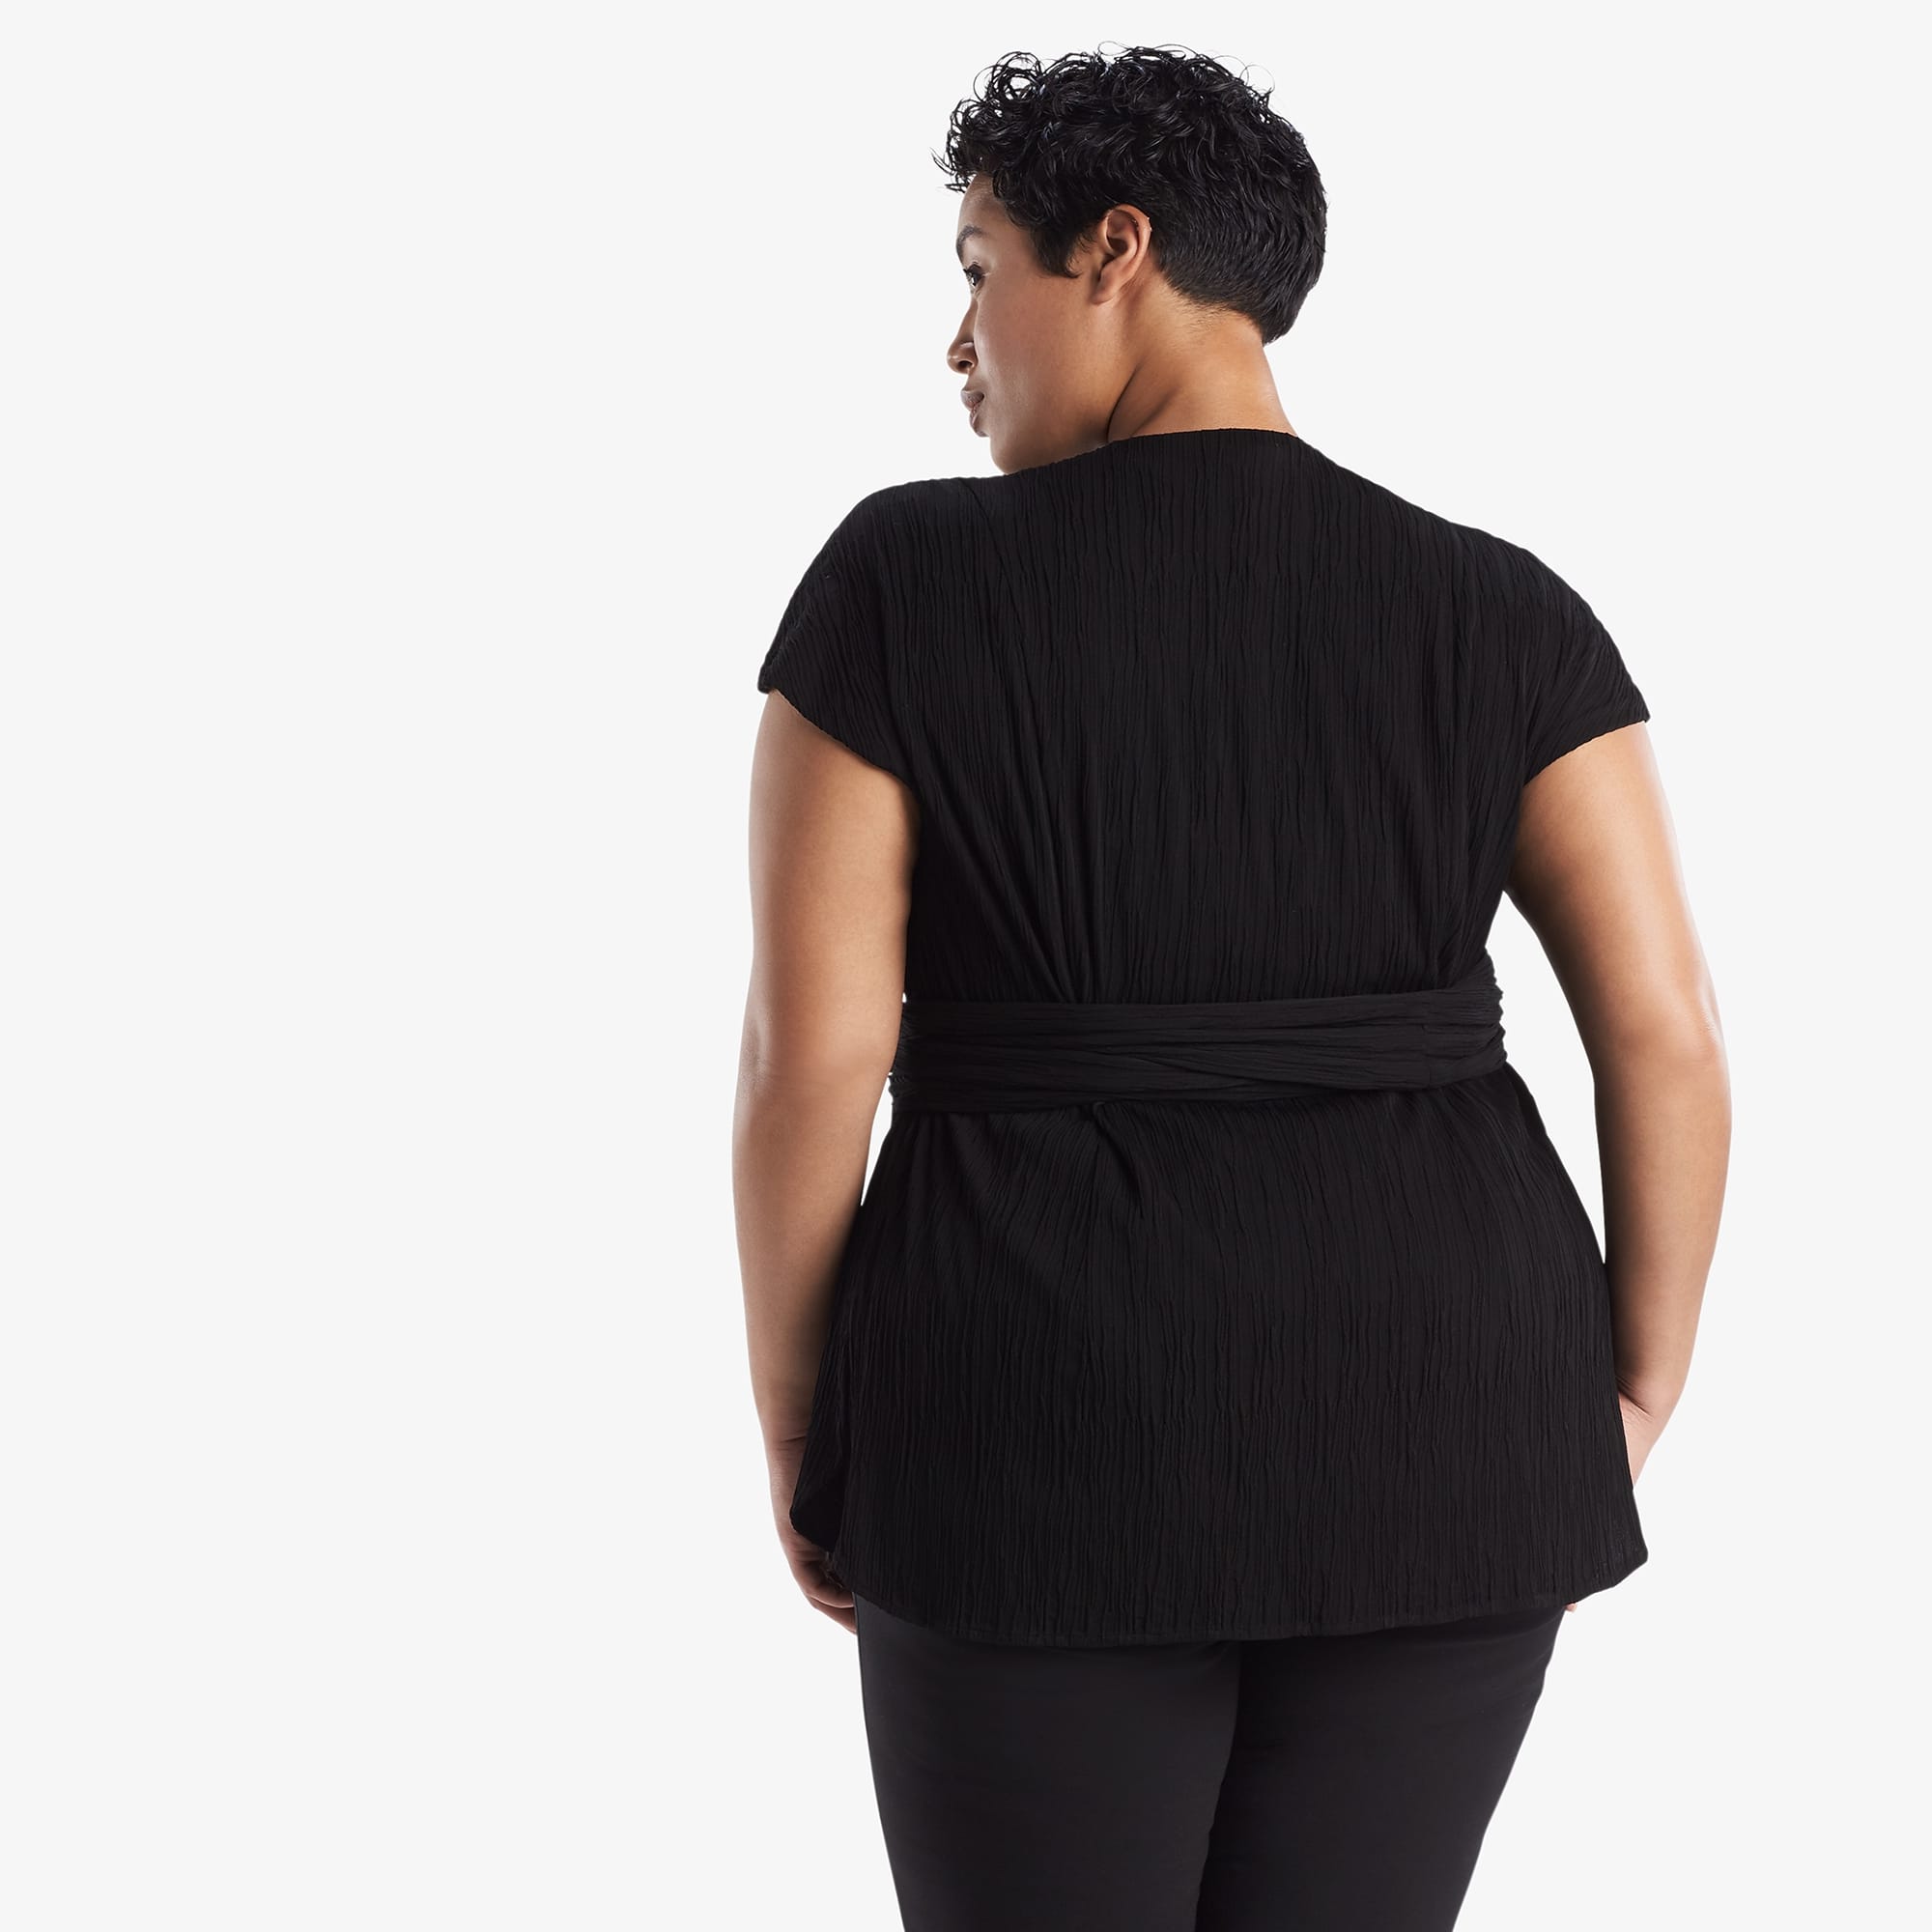 Back image of a woman standing wearing the Valerie Top in black